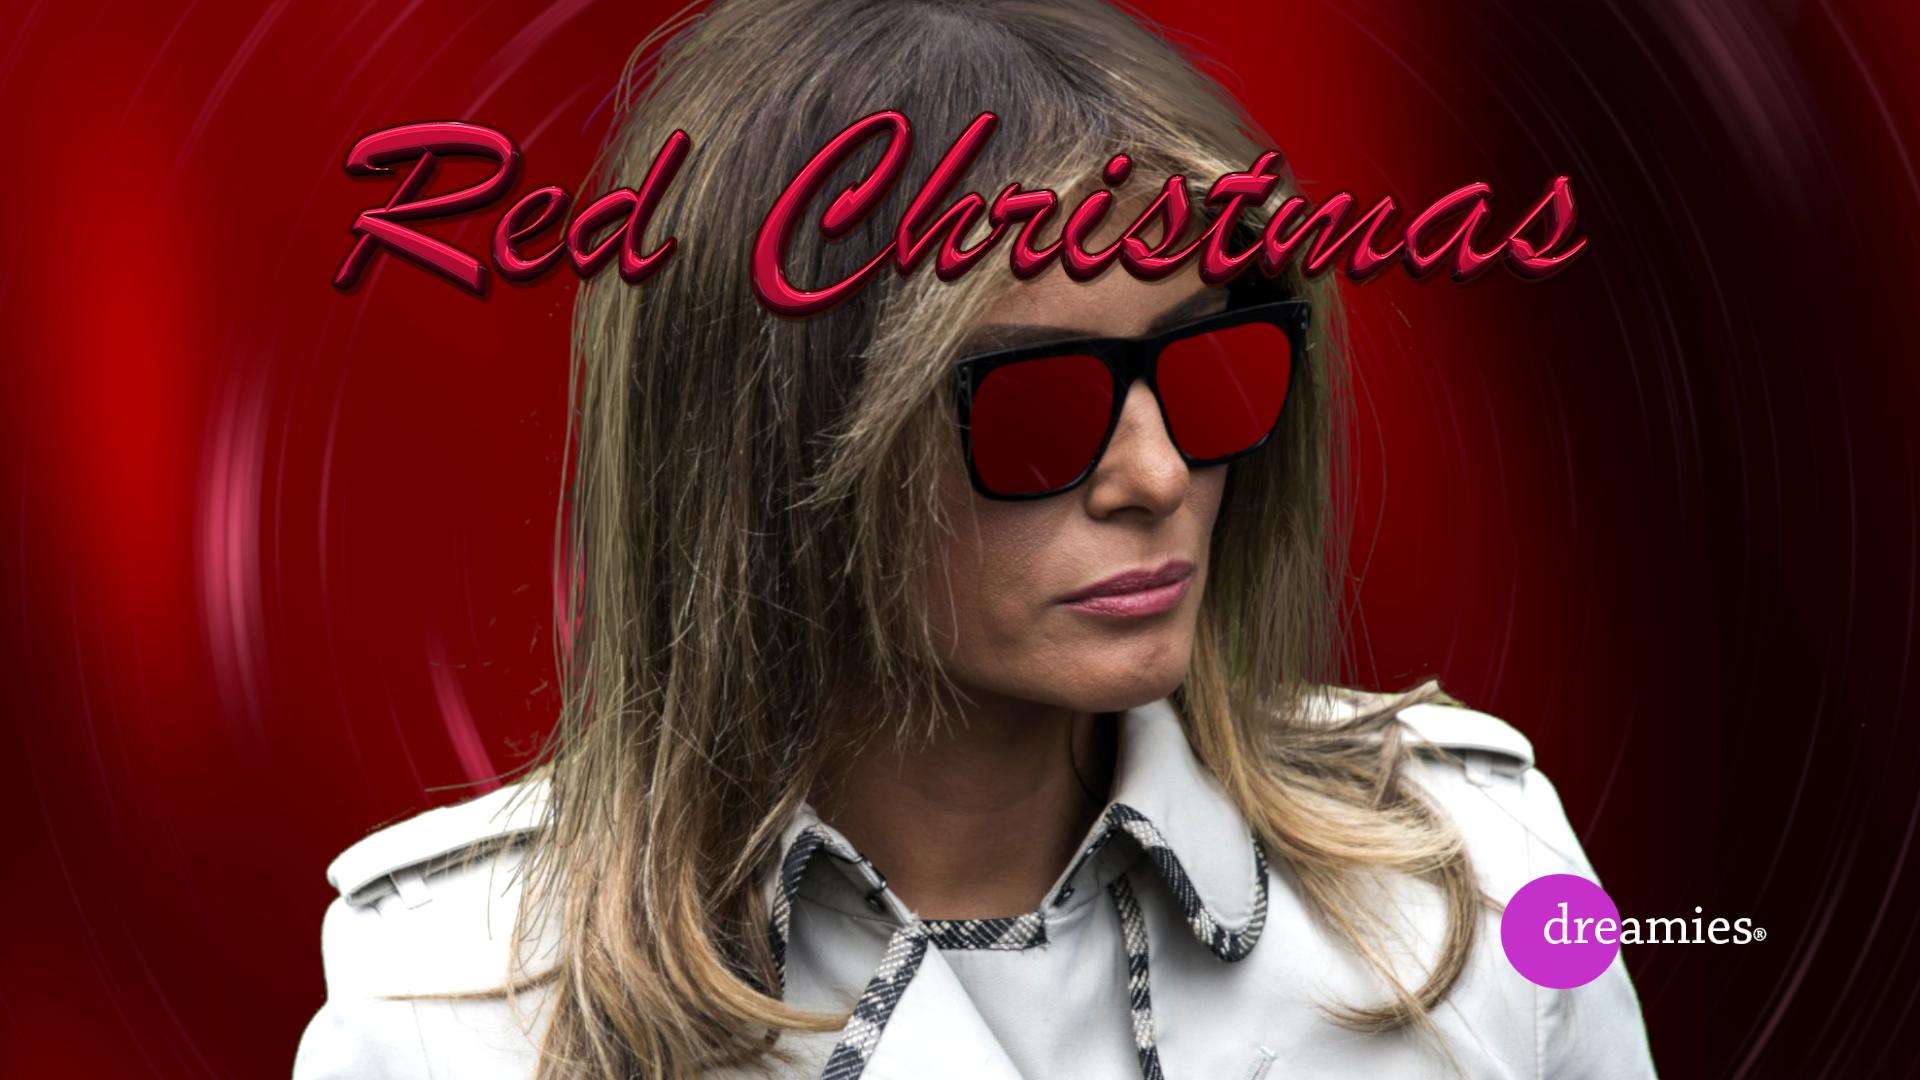 RedChristmas